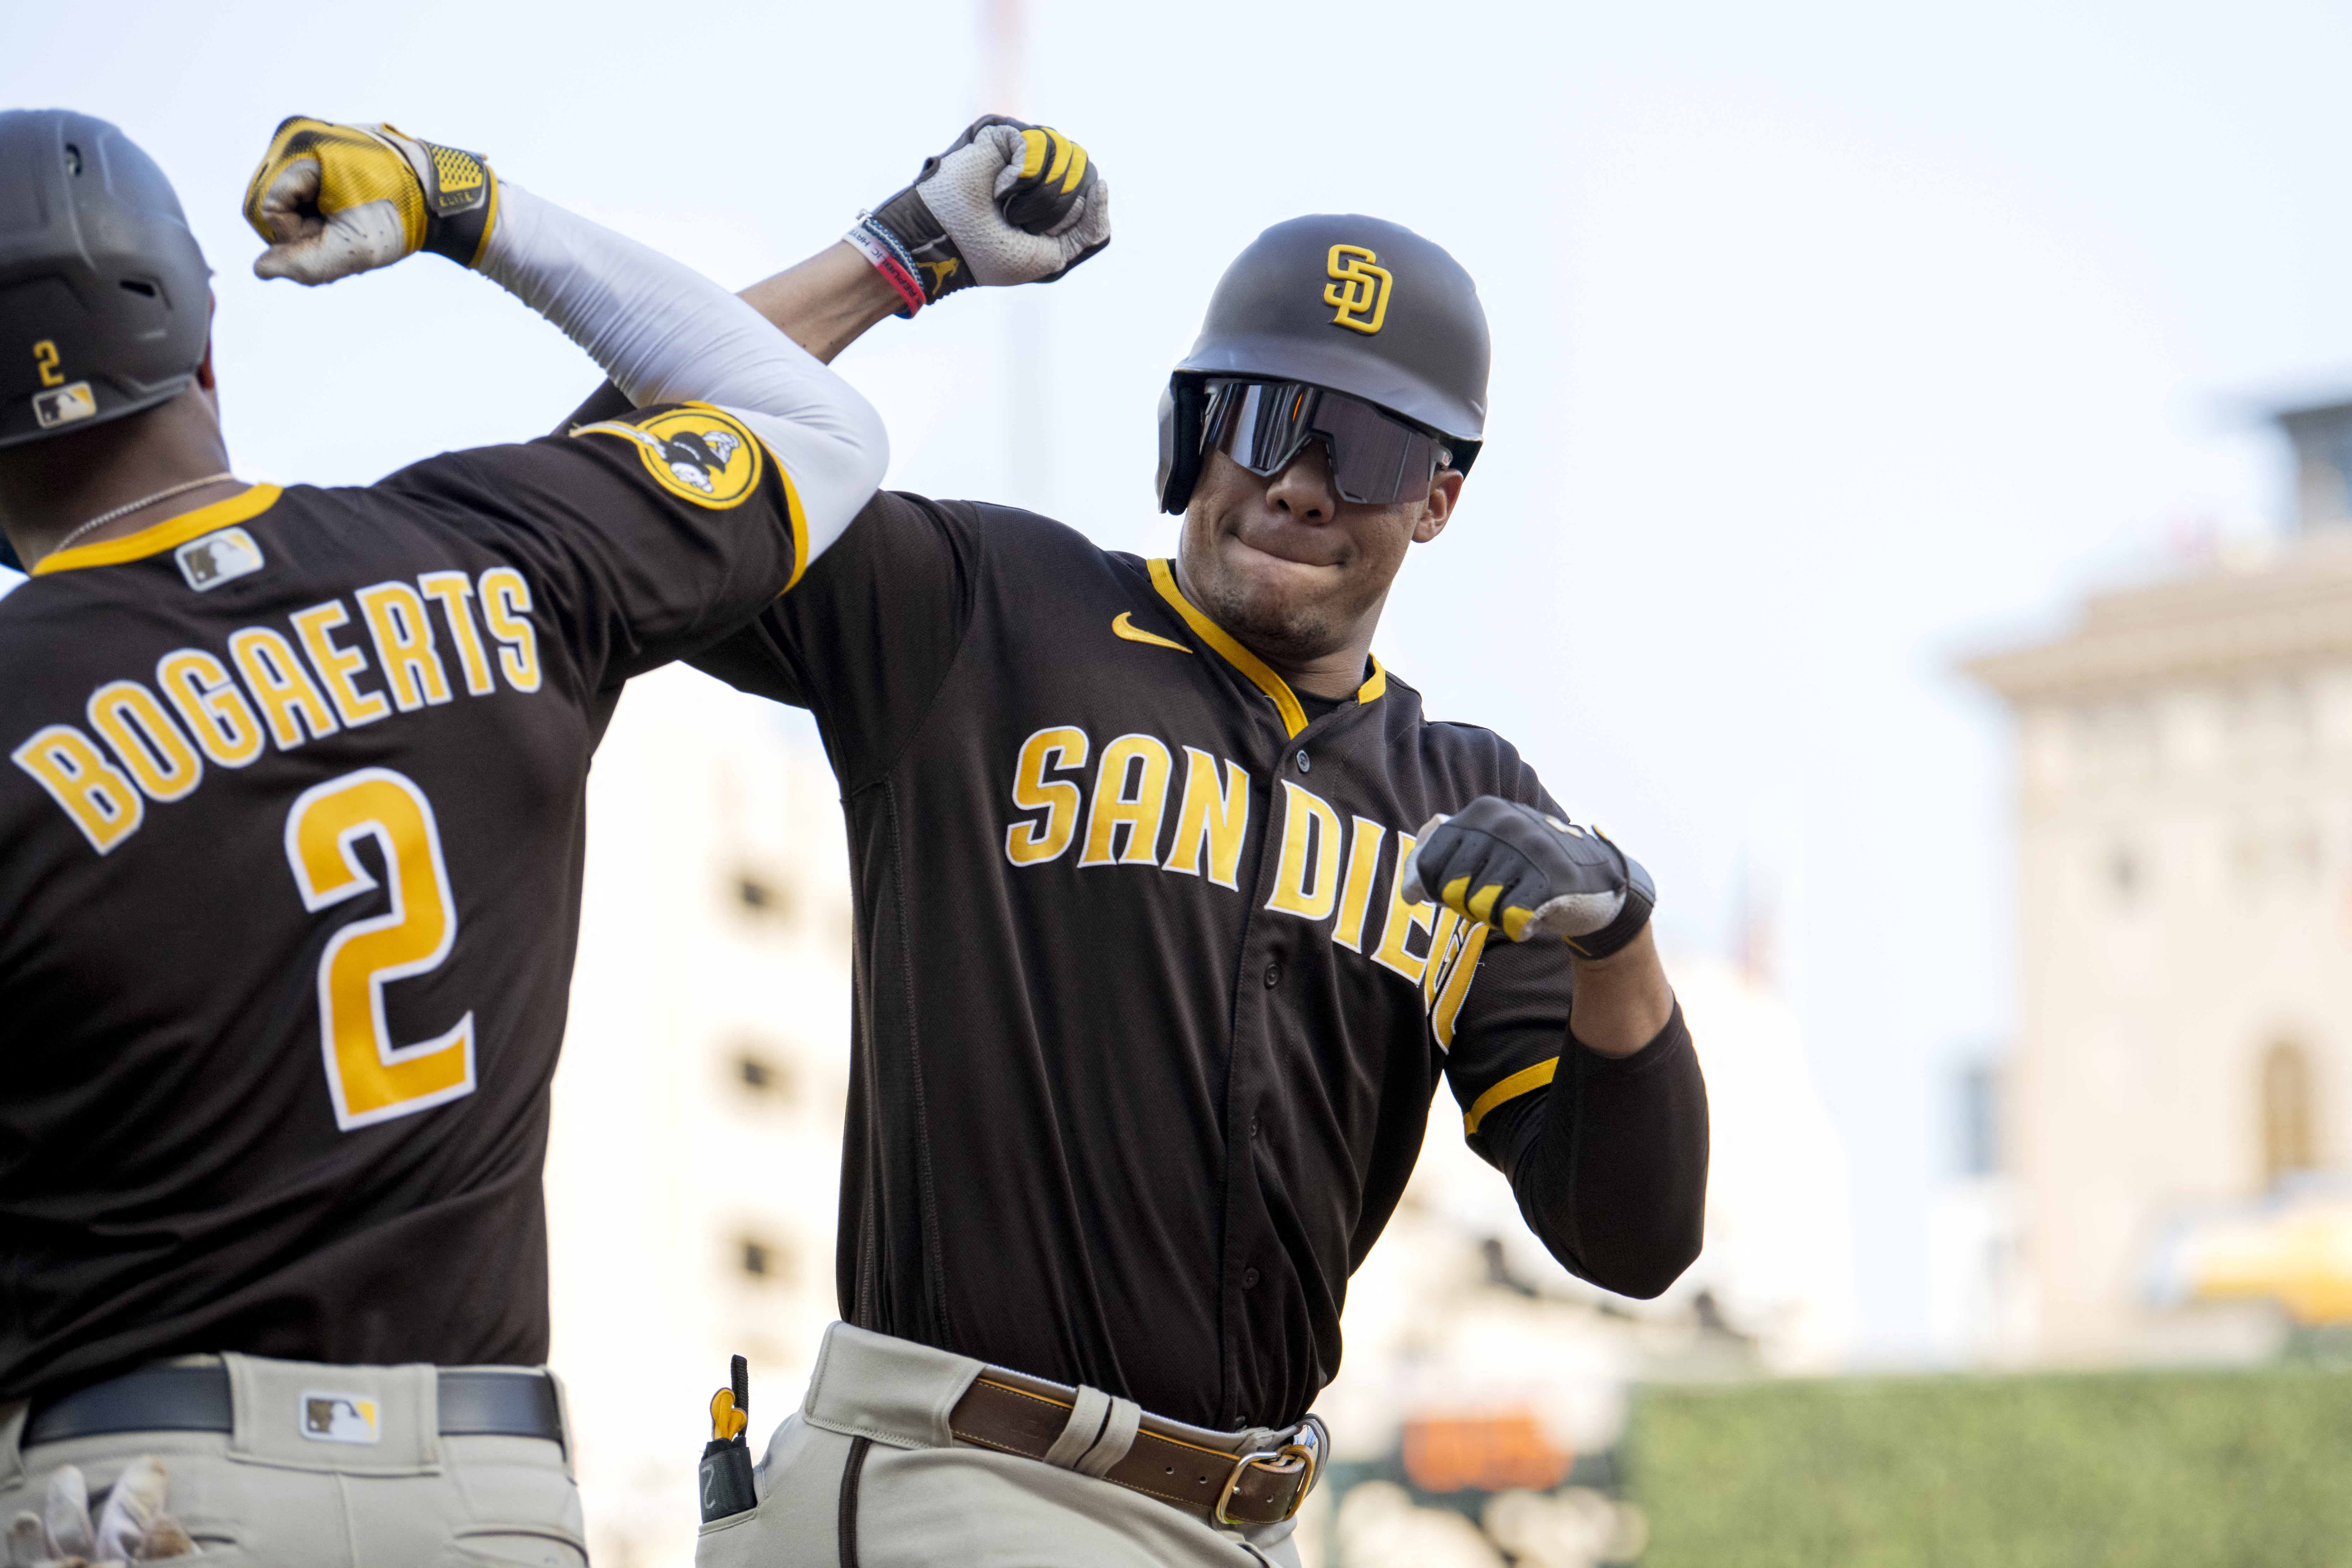 Padres slugger Soto belts two homers to defeat Tigers 5-4 in opener